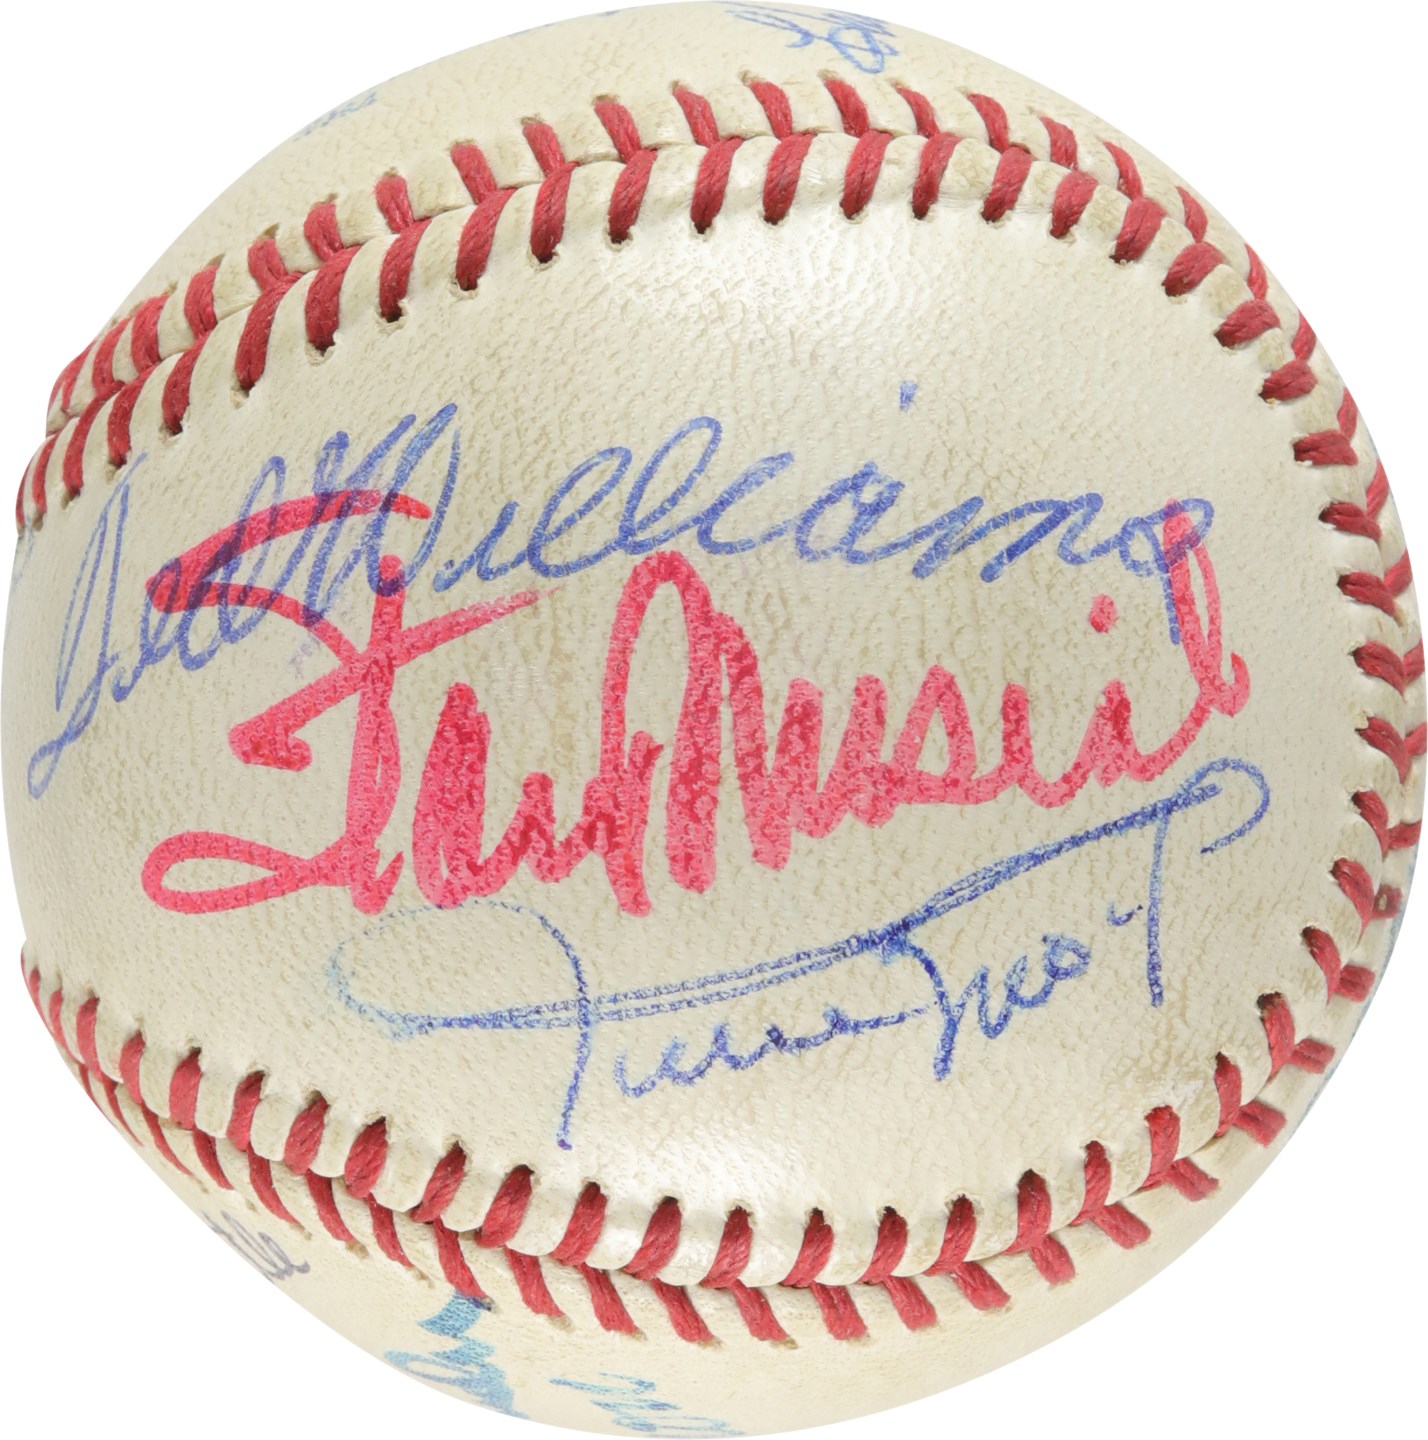 Baseball Autographs - Hall of Famers Signed Baseball w/500 HR & 3000 Hit Clubs (11)